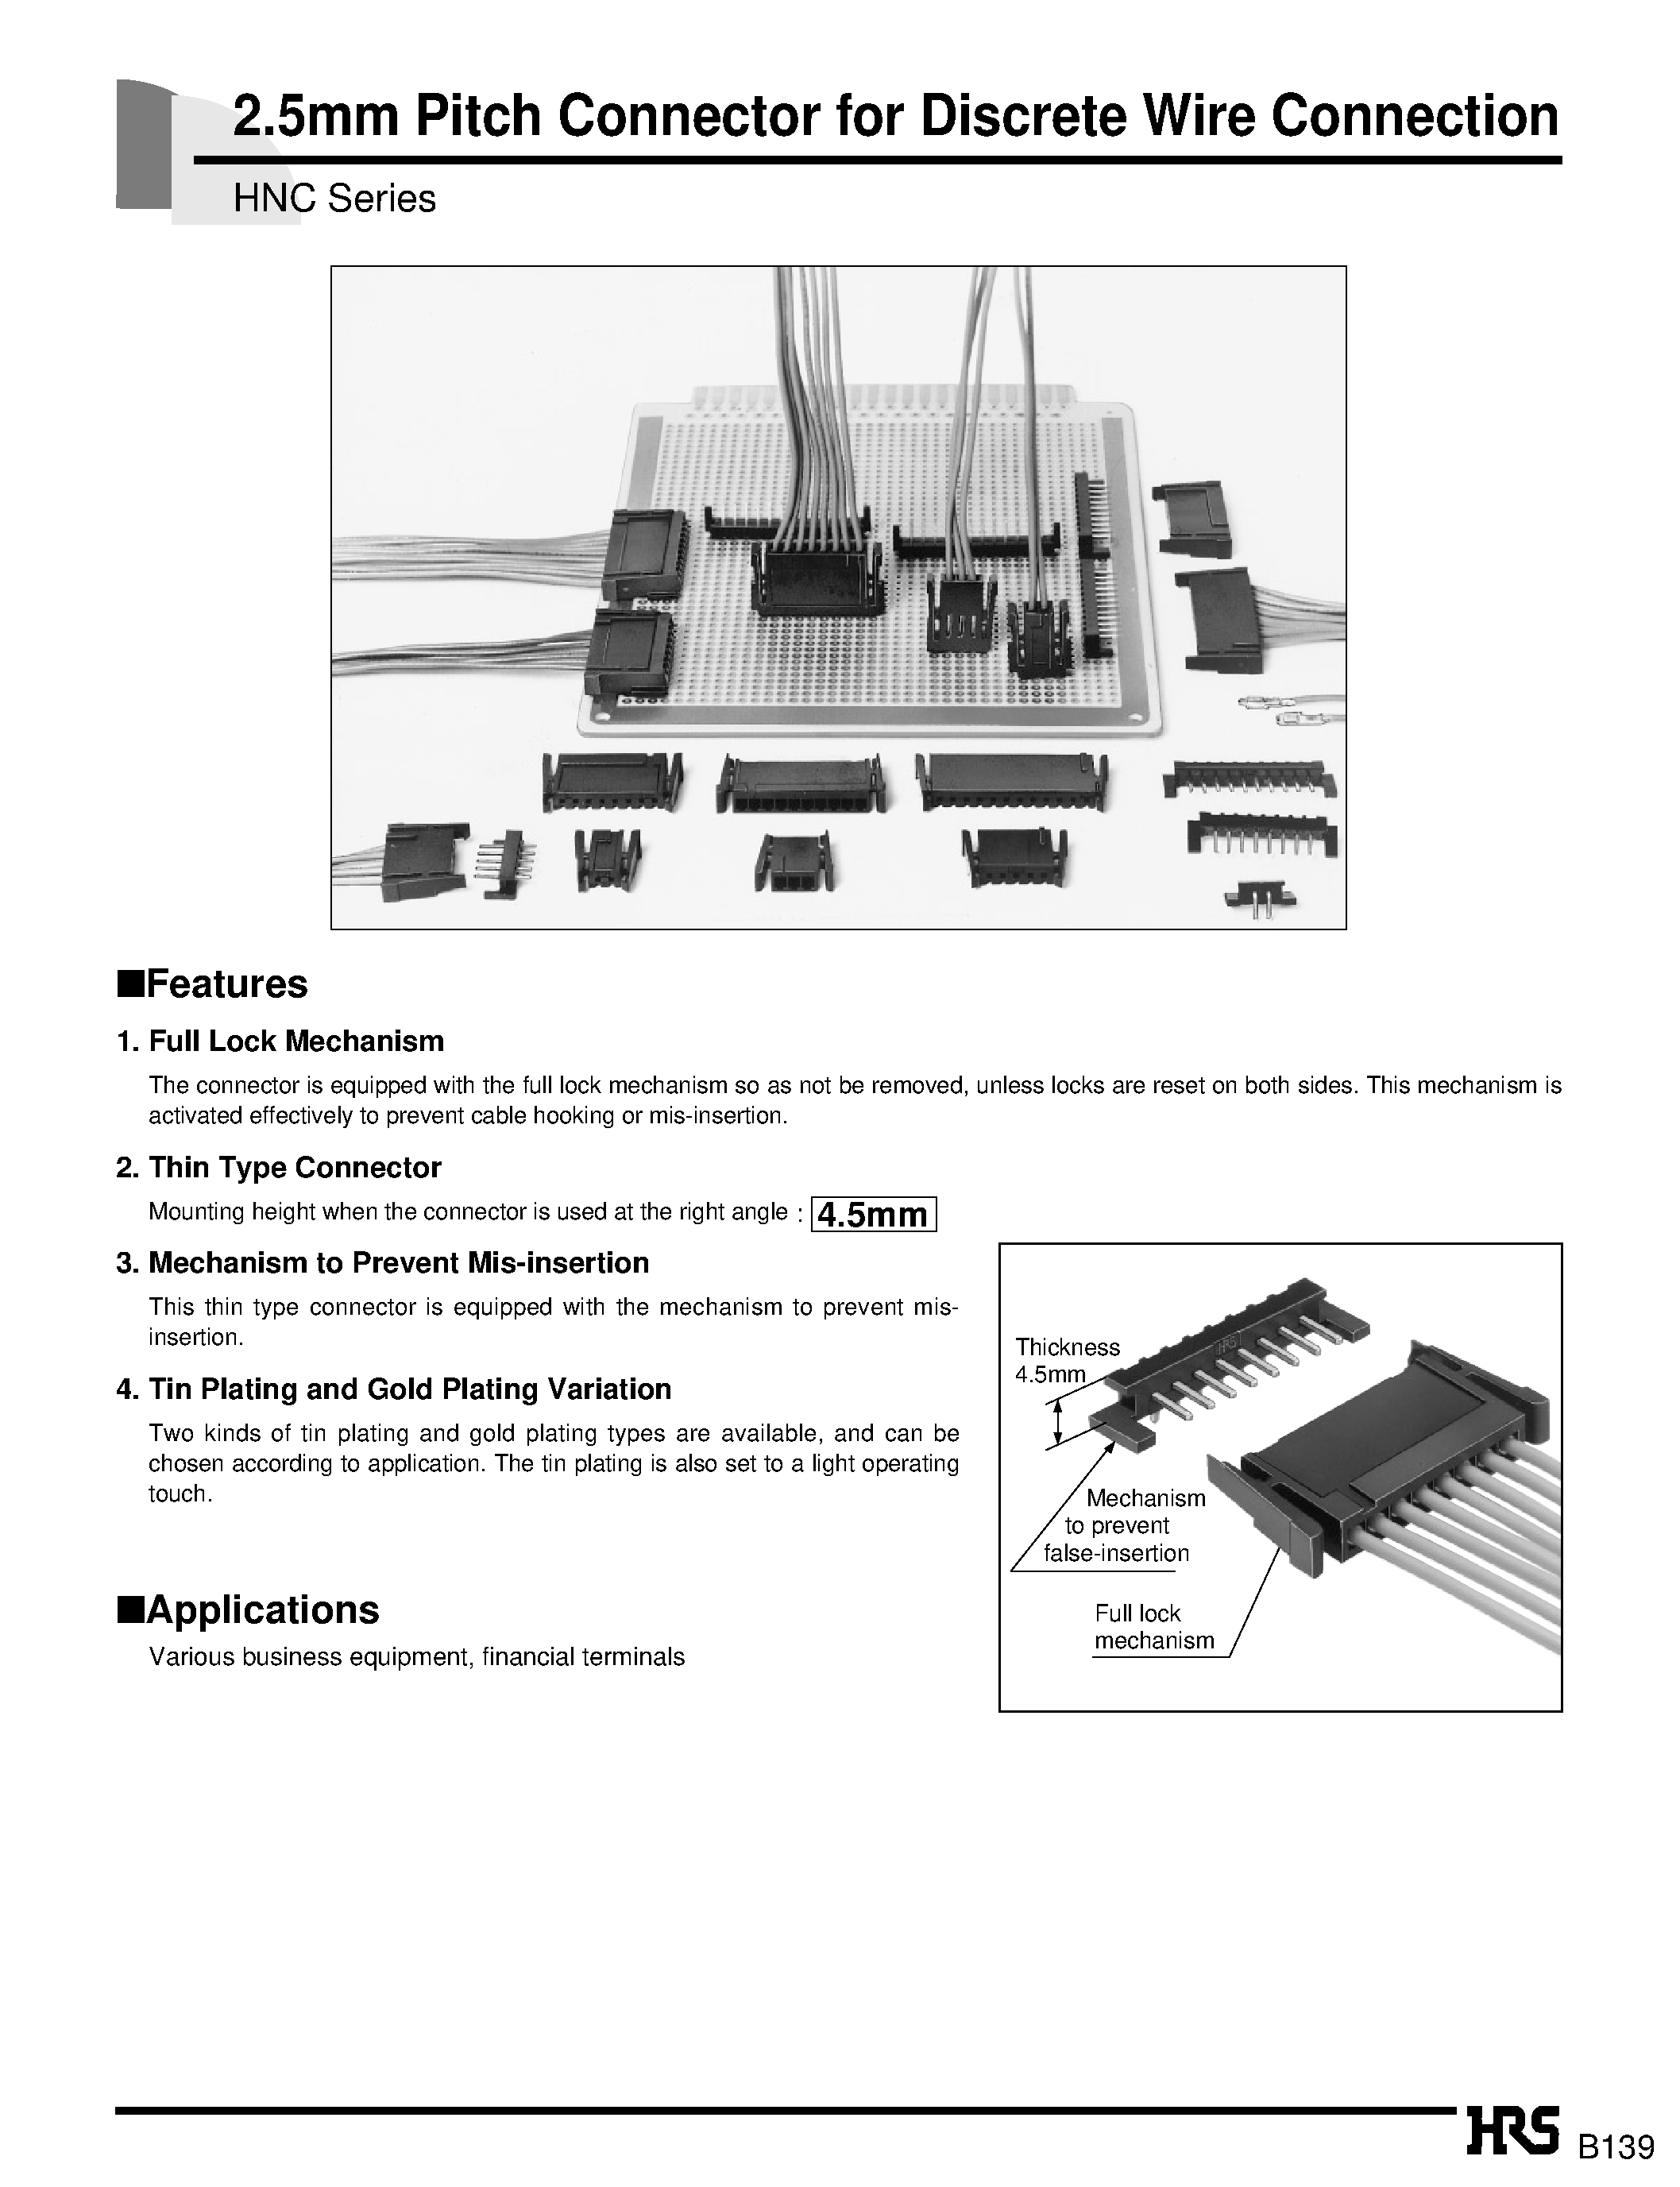 Datasheet HNC1-2.5S-12 - 2.5mm Pitch Connector for Discrete Wire Connection page 1